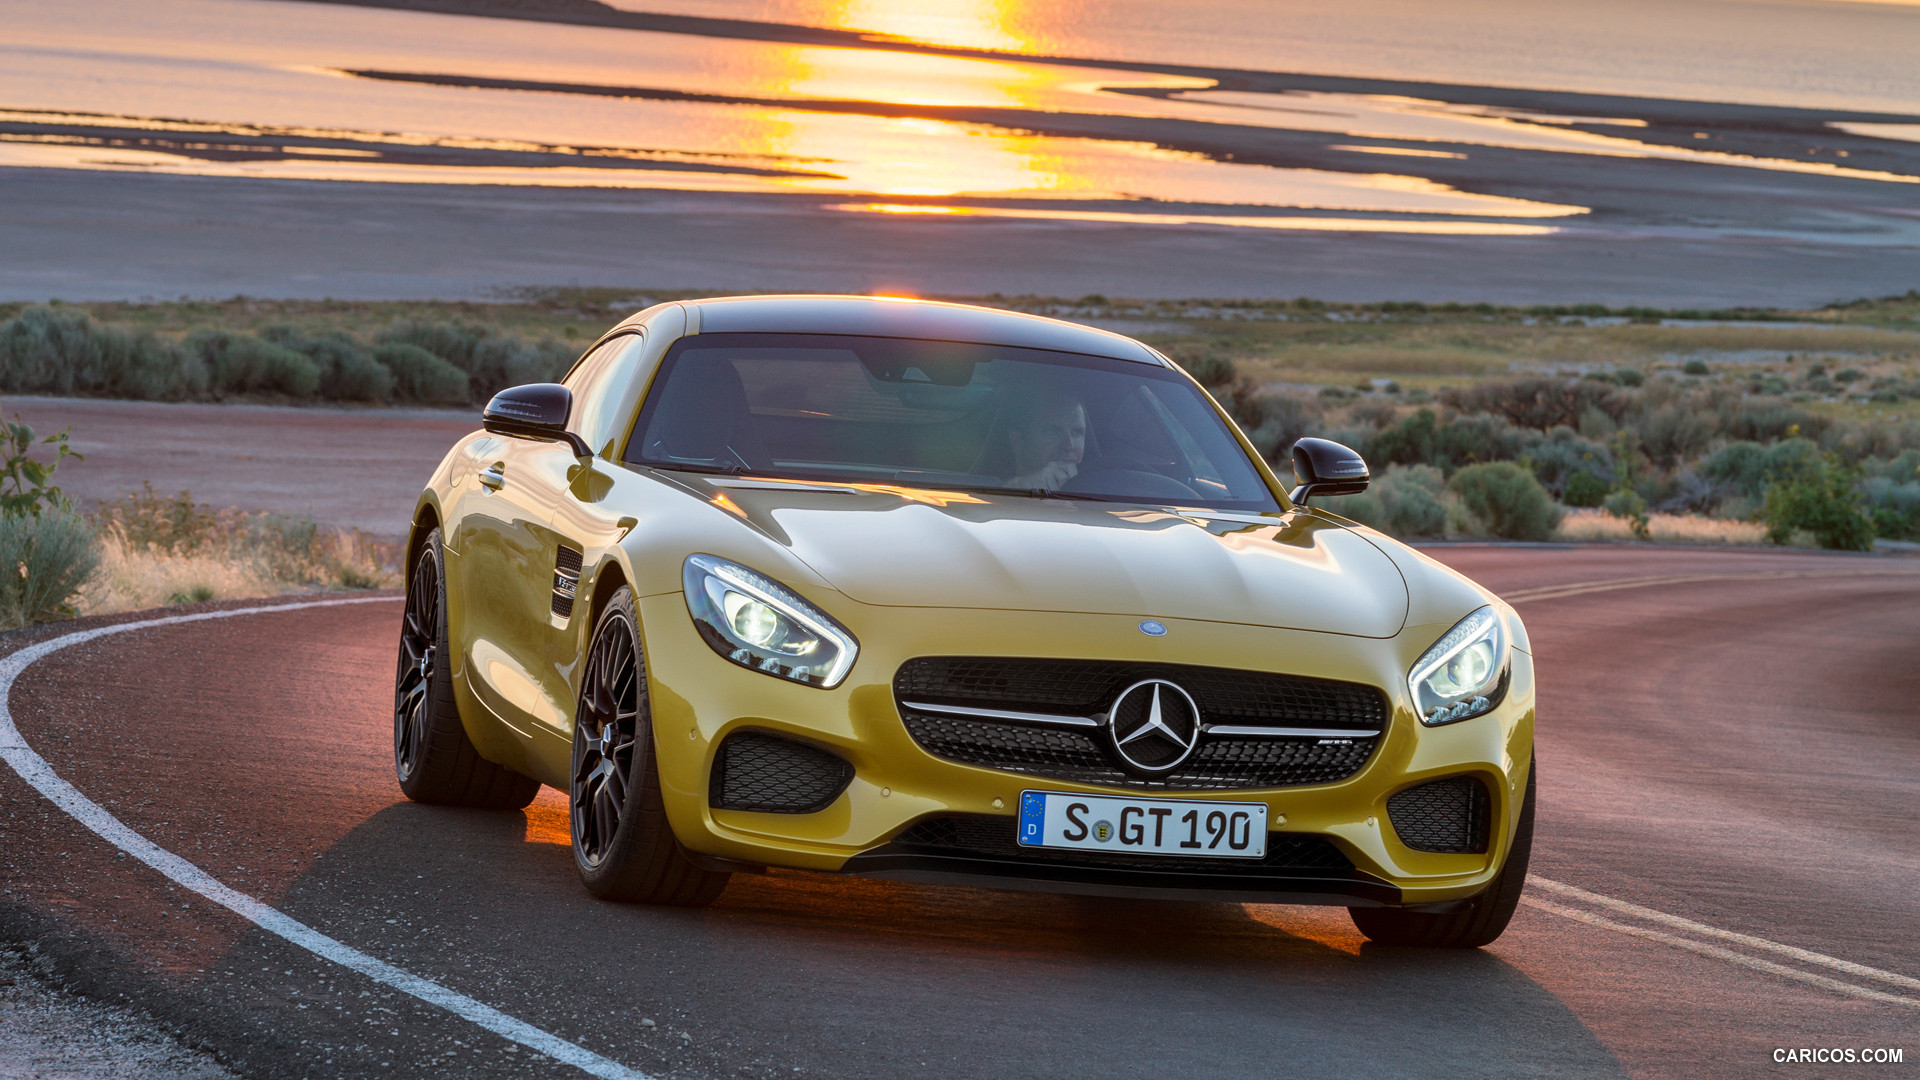 2016 Mercedes-AMG GT Exterior Night Package (Solarbeam) - Front, #105 of 190